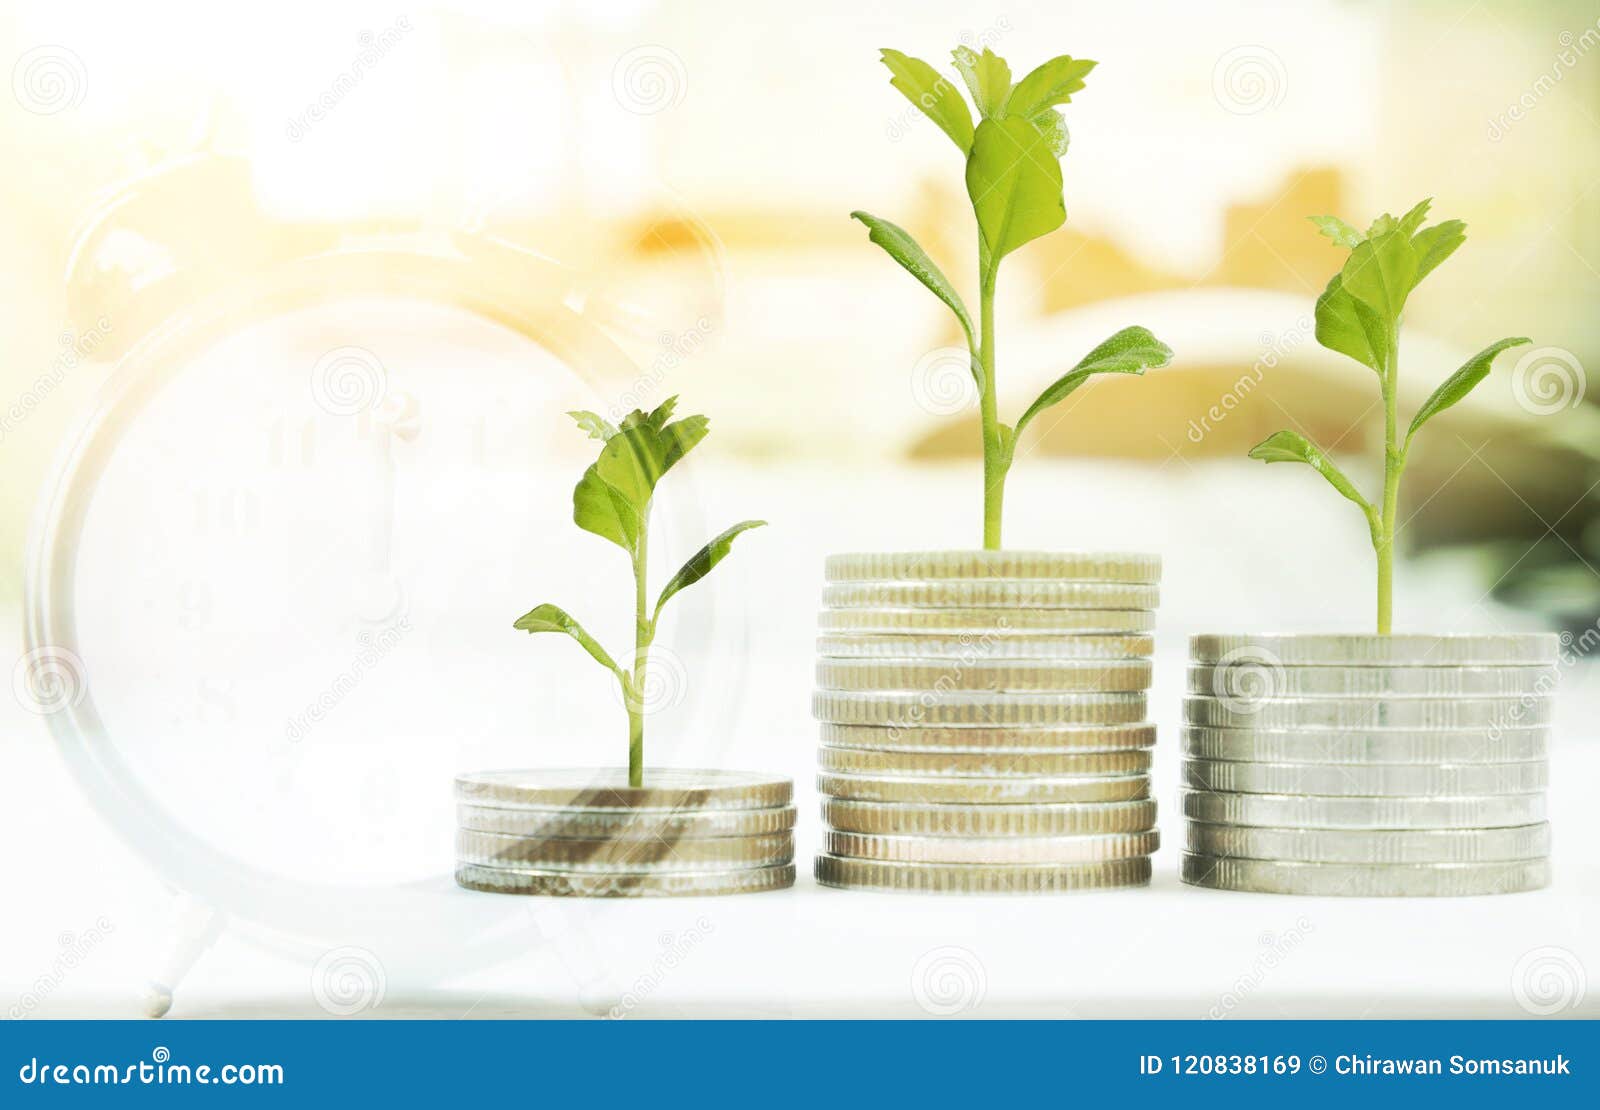 coin with tree in mutual funds concept.